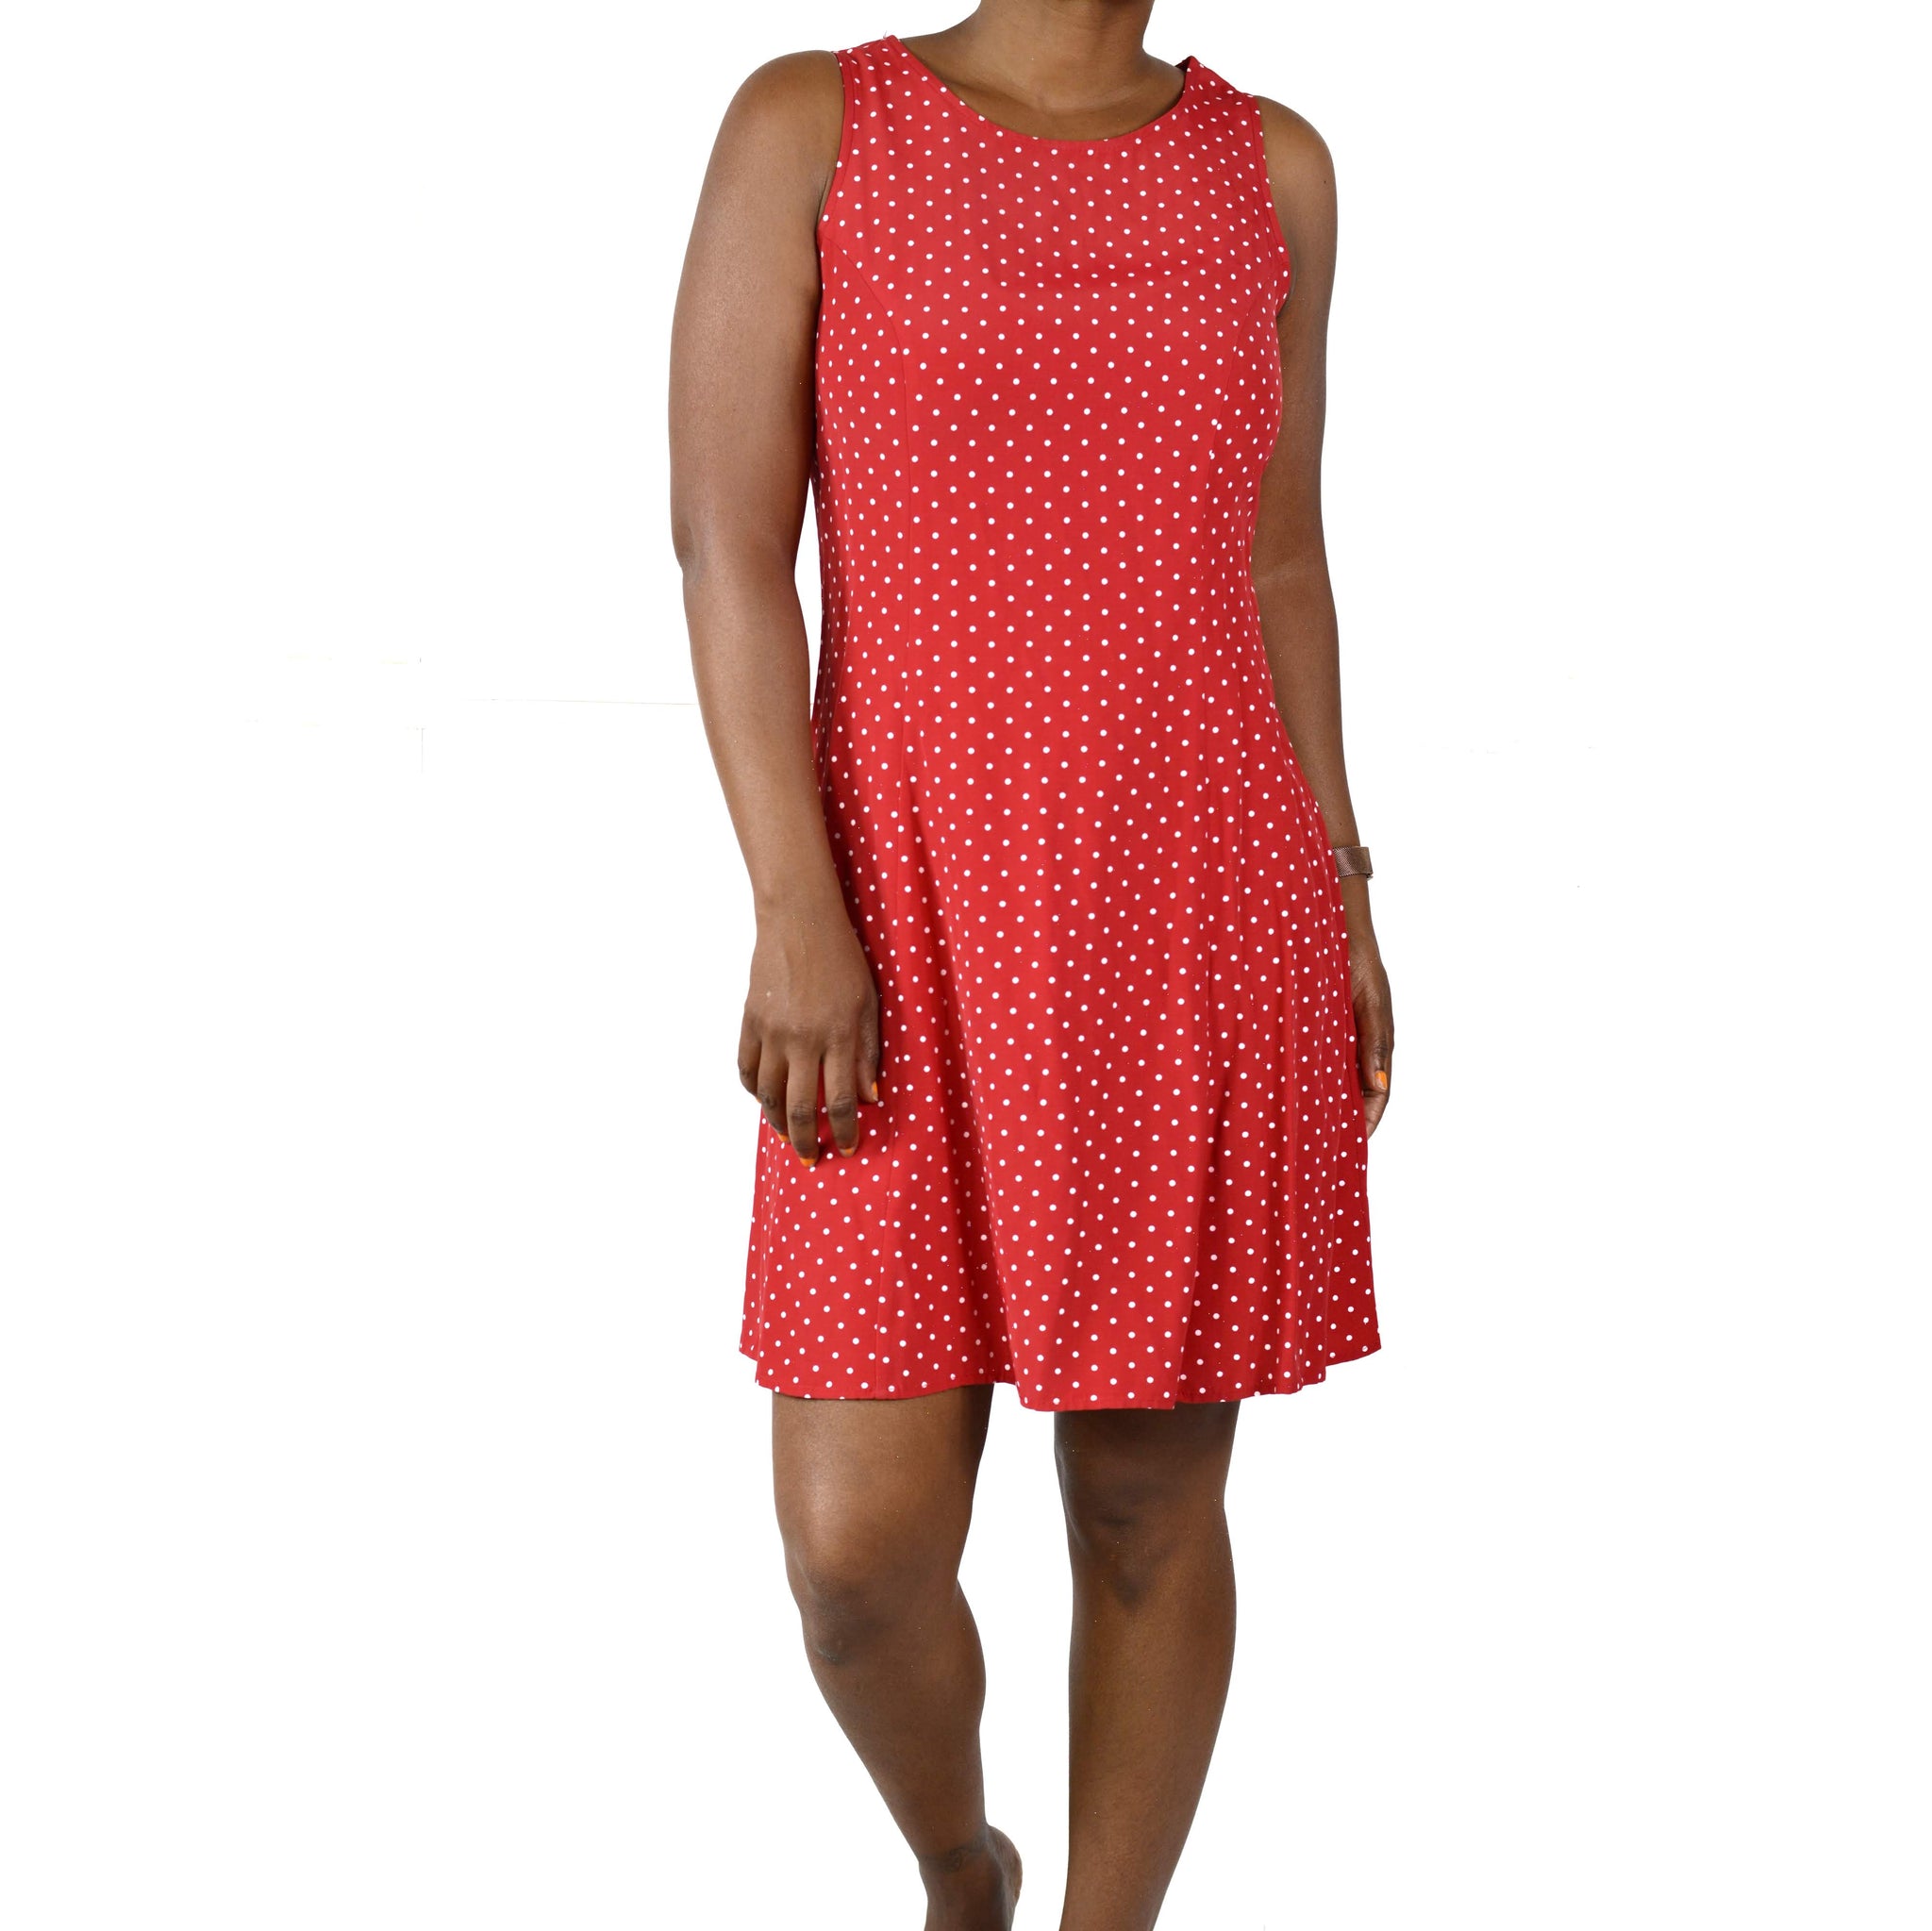 Vintage Corset Rayon Dress Kmart 90s Red Polka Dot Size Small New